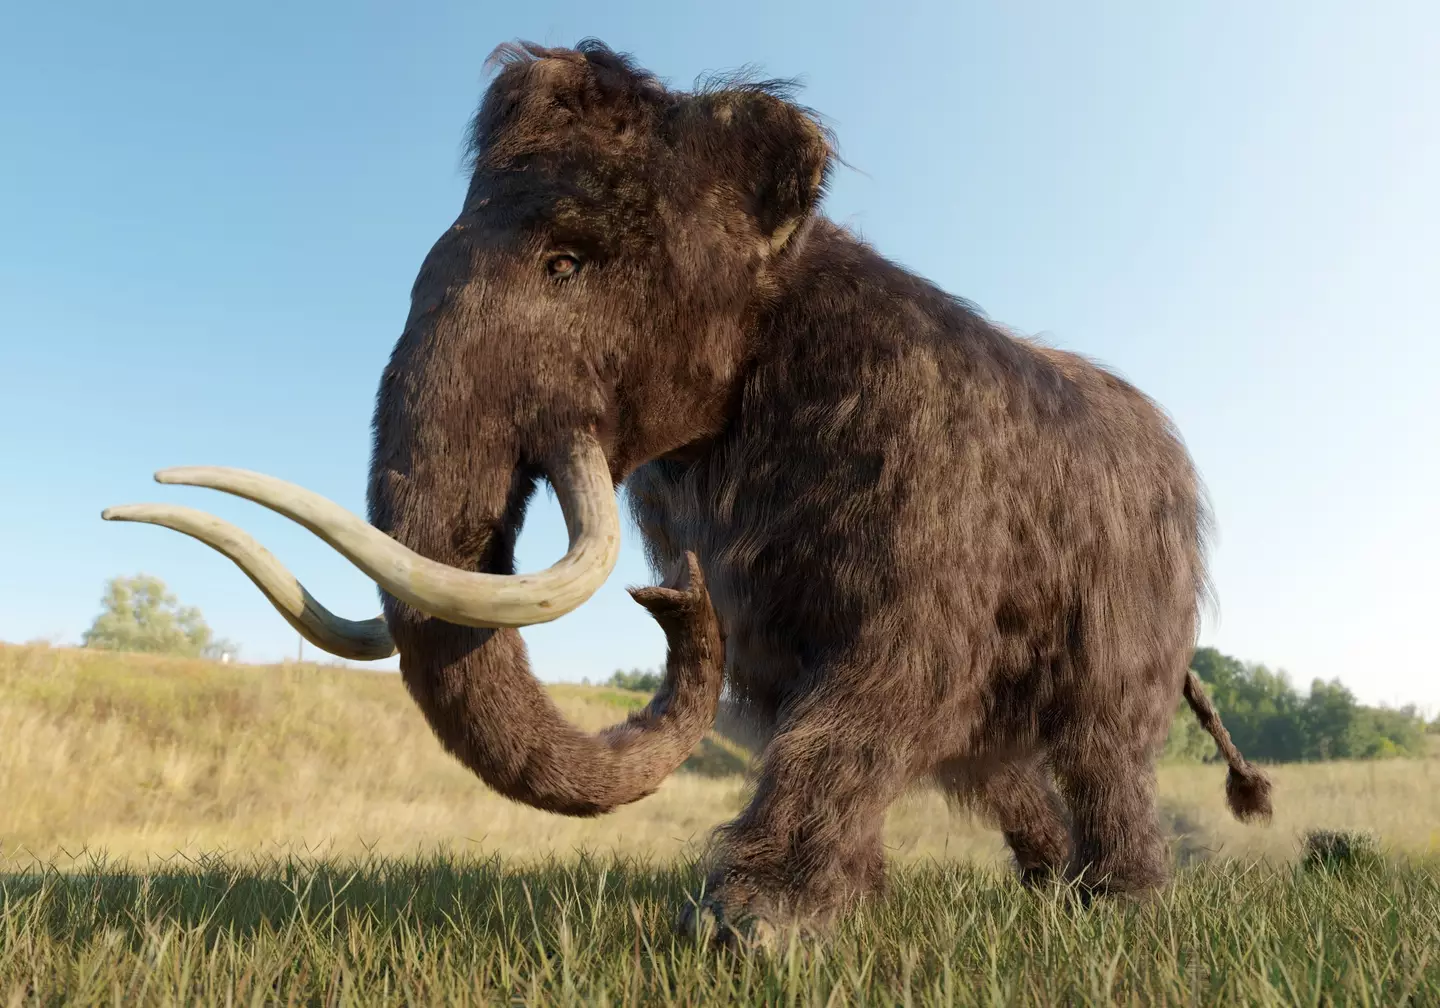 Scientists are trying to bring back the wooly mammoth.